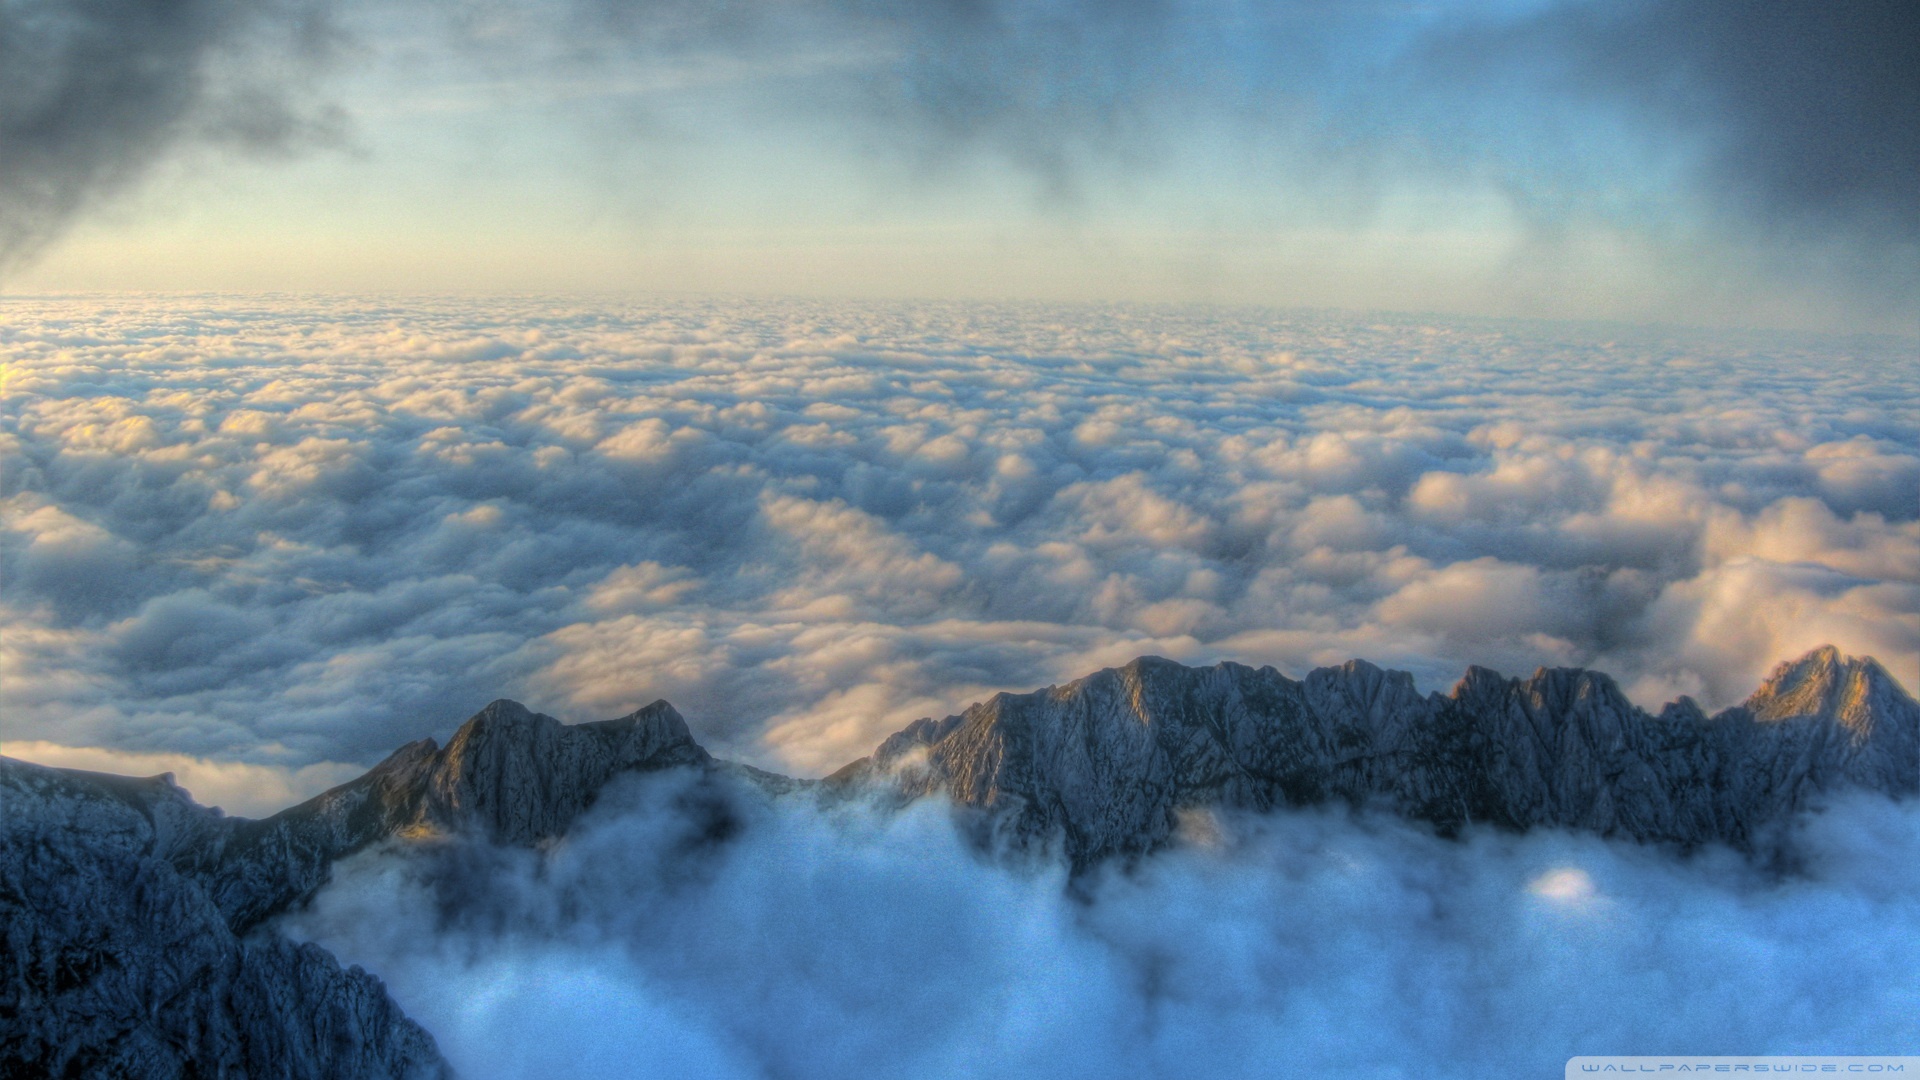 Above The Clouds HDr Wallpaper